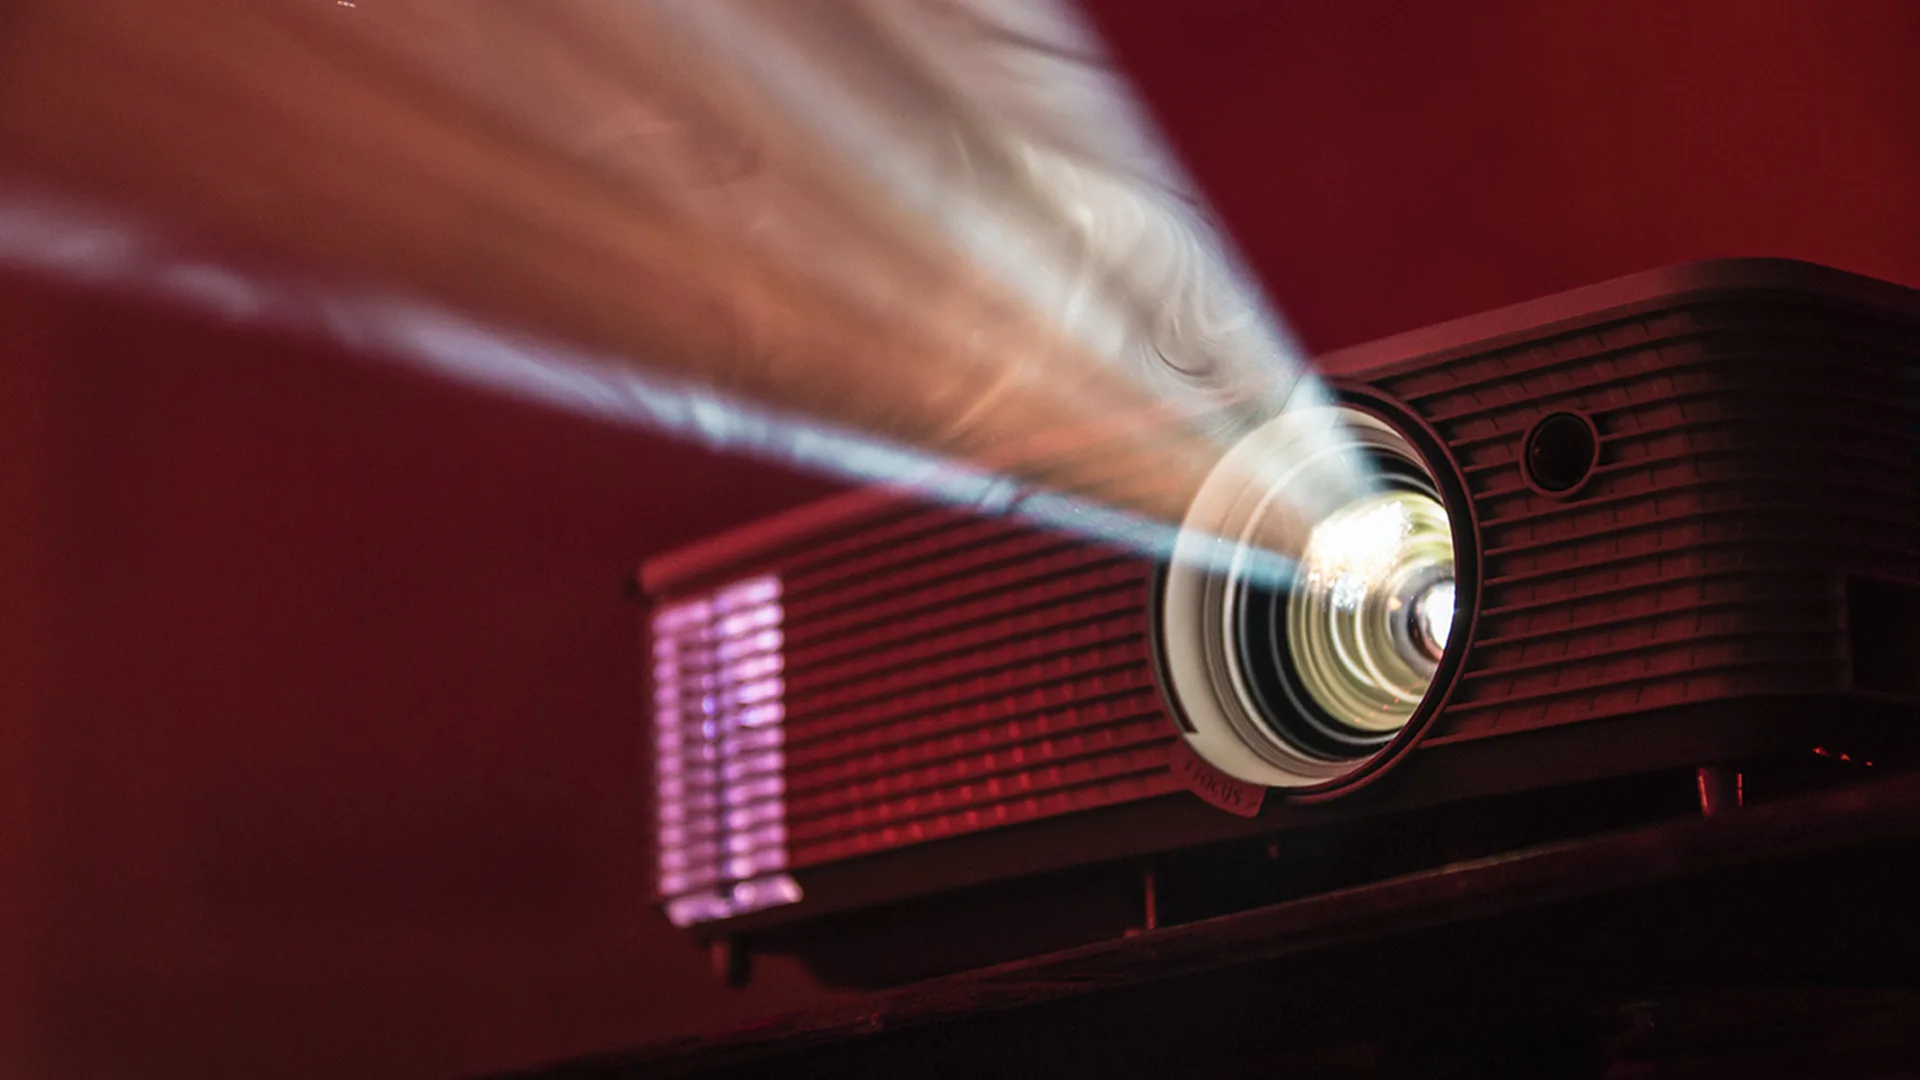 Projector showing a movie